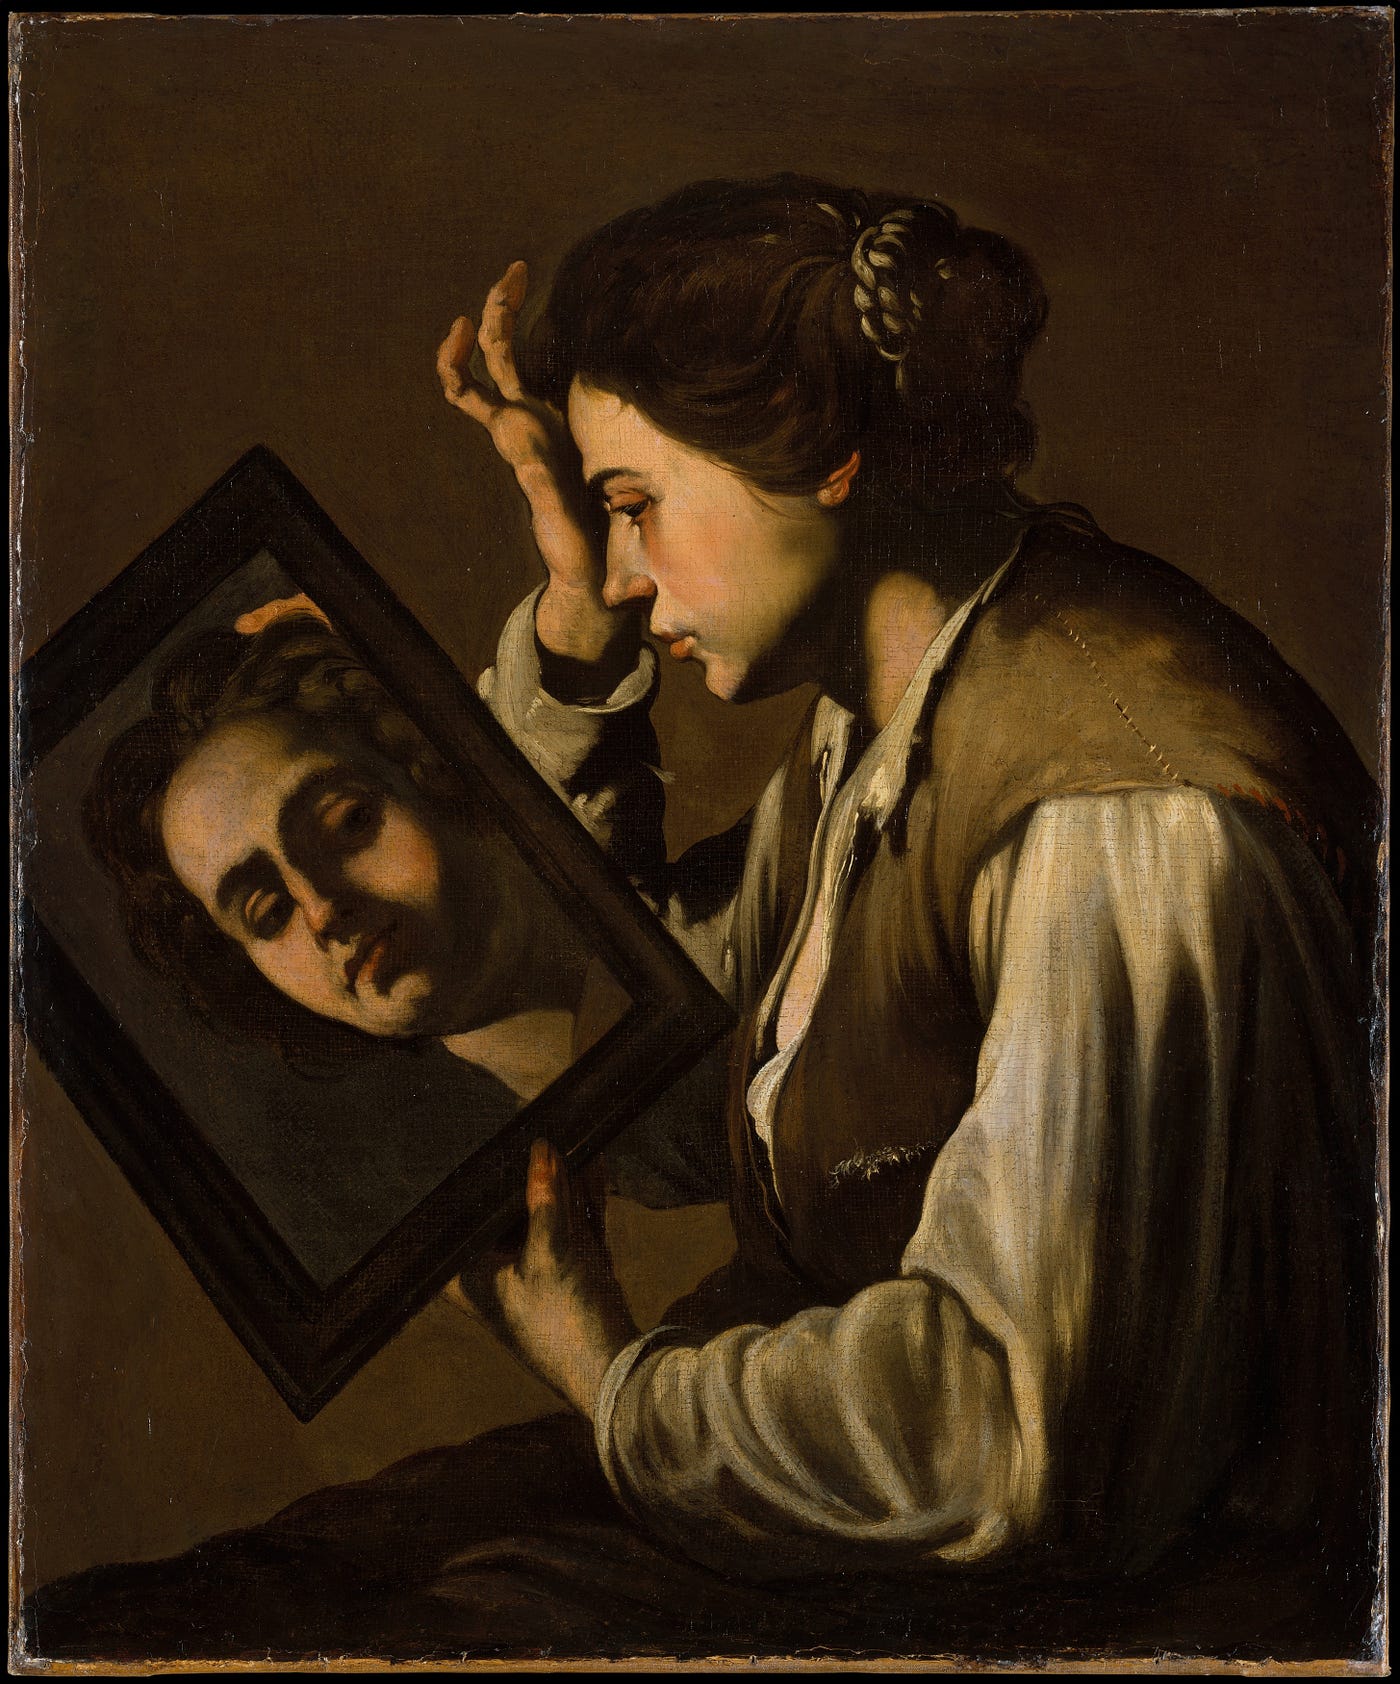 Image of women holding a mirror to her face